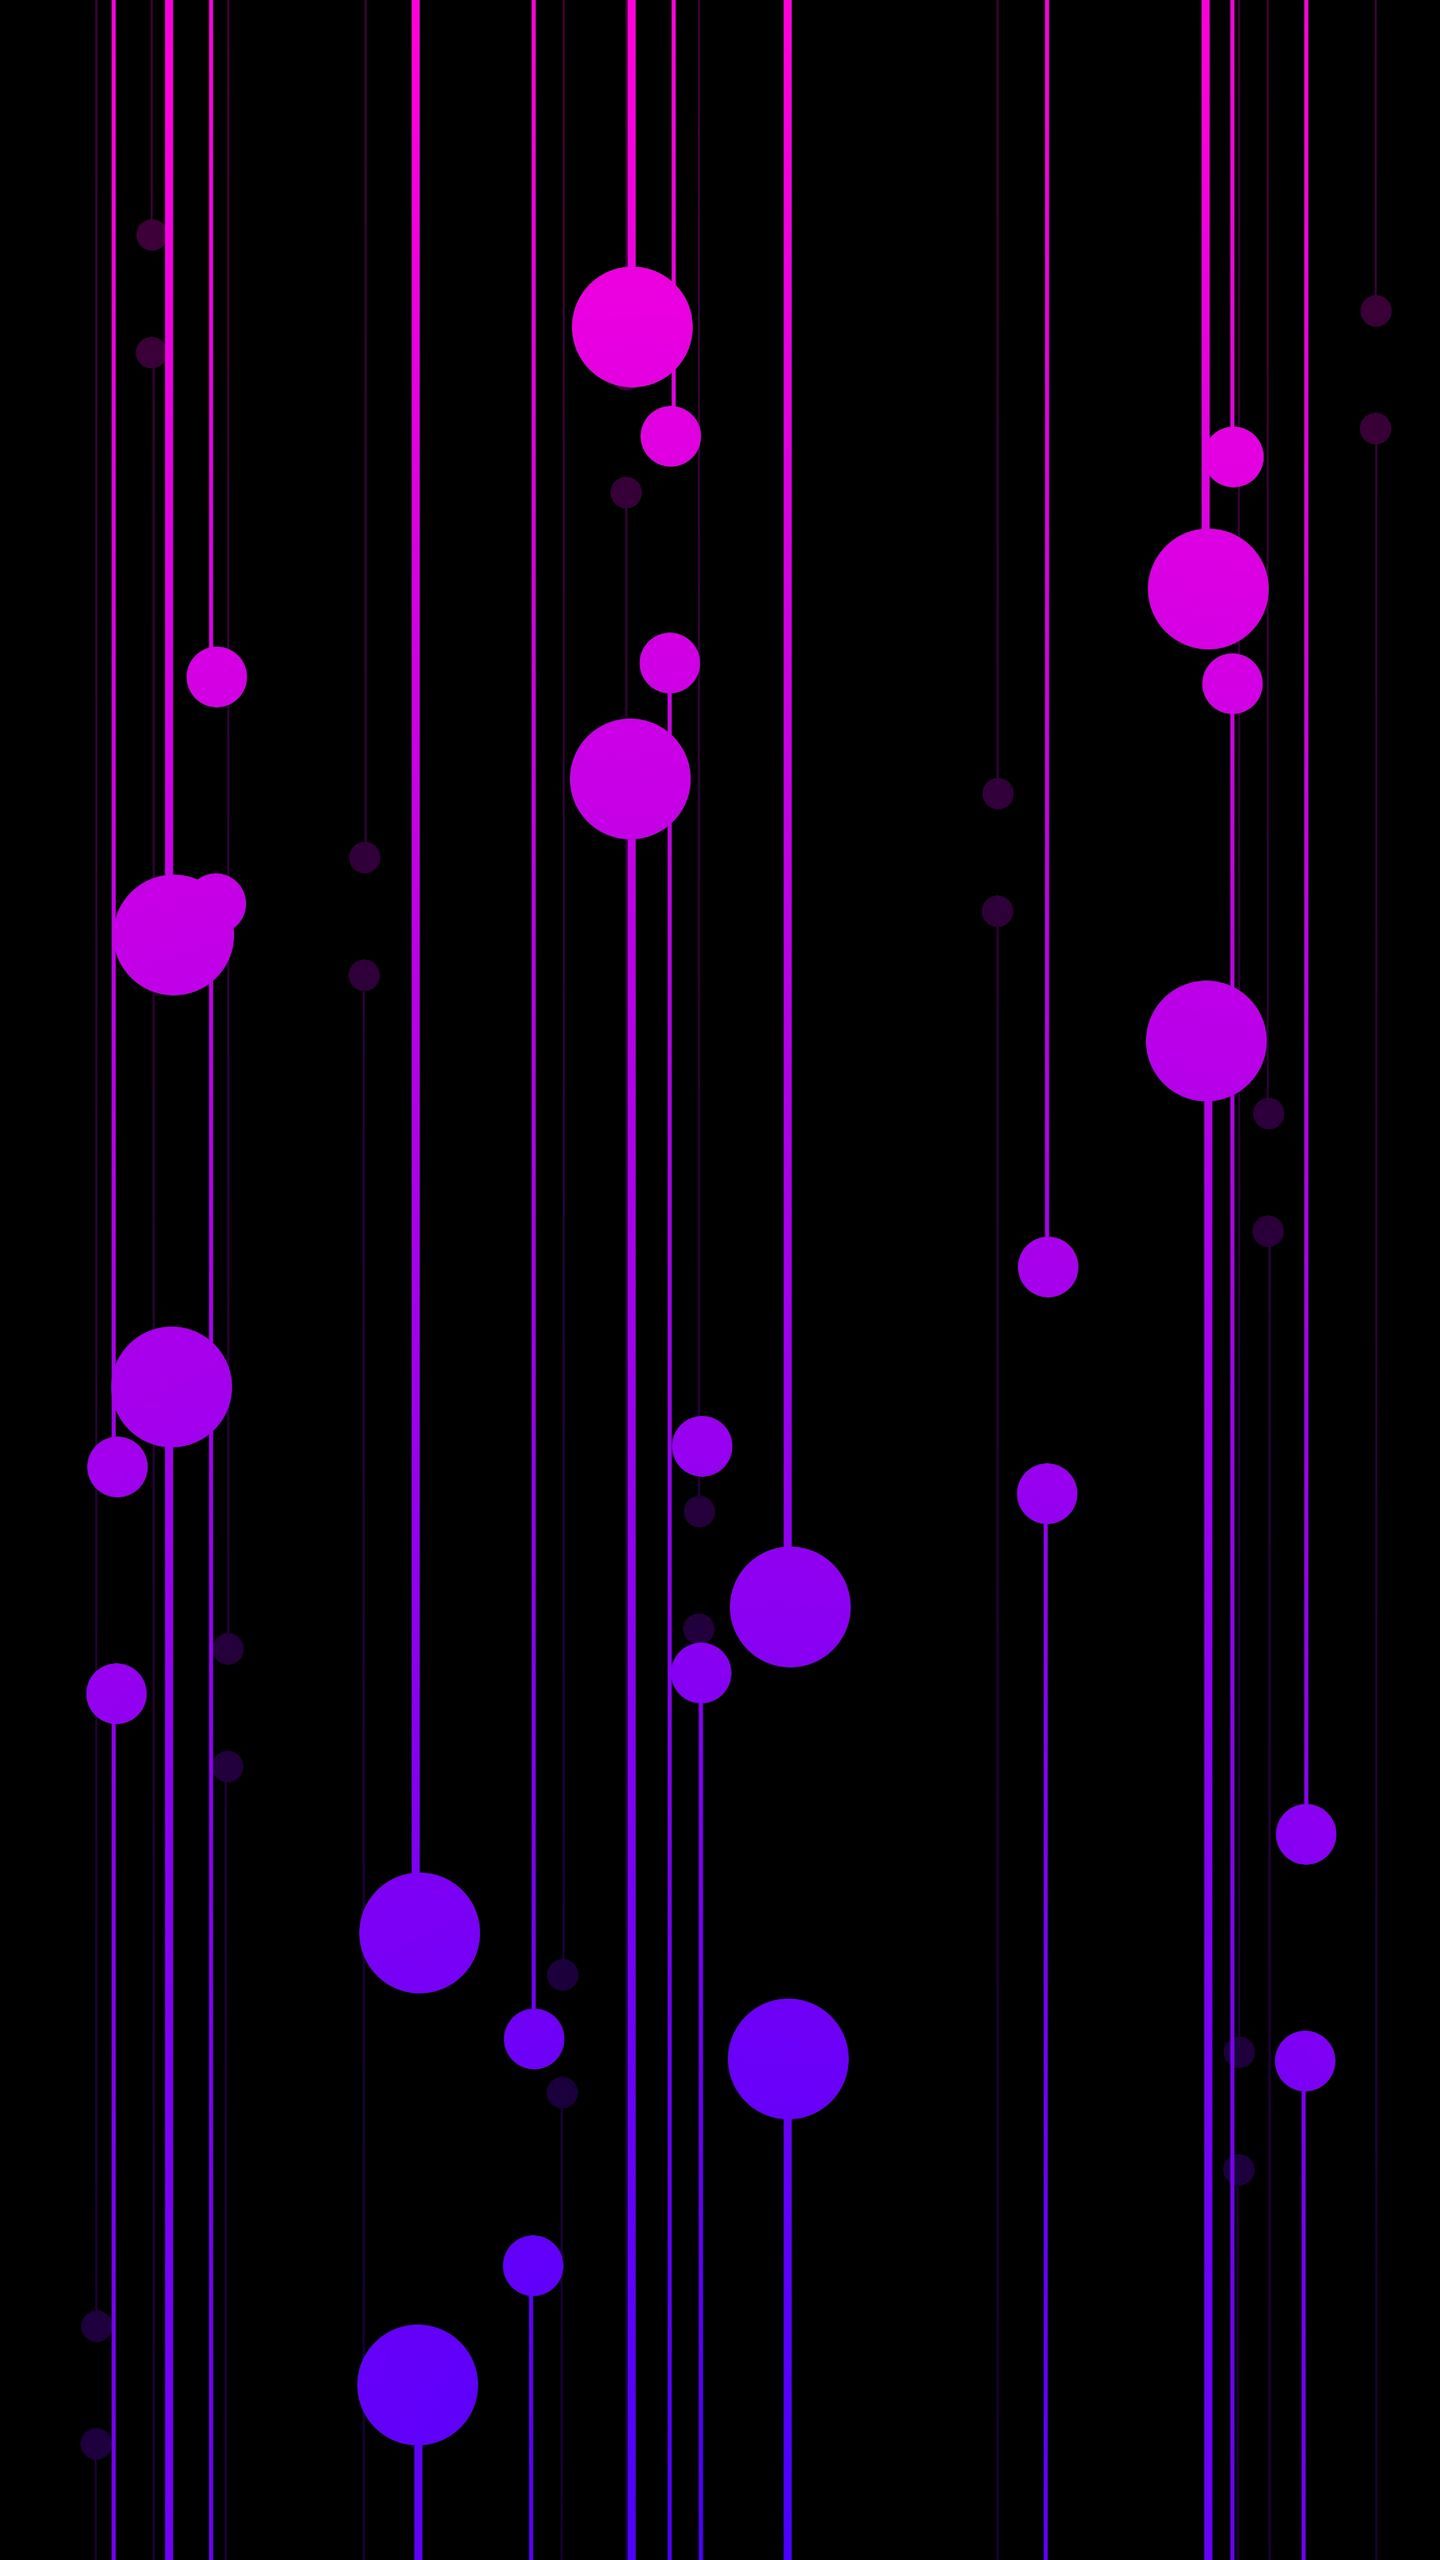 Download wallpaper 1440x2560 circles, lines, lilac, shapes qhd samsung galaxy s s edge, note, lg g4 HD background